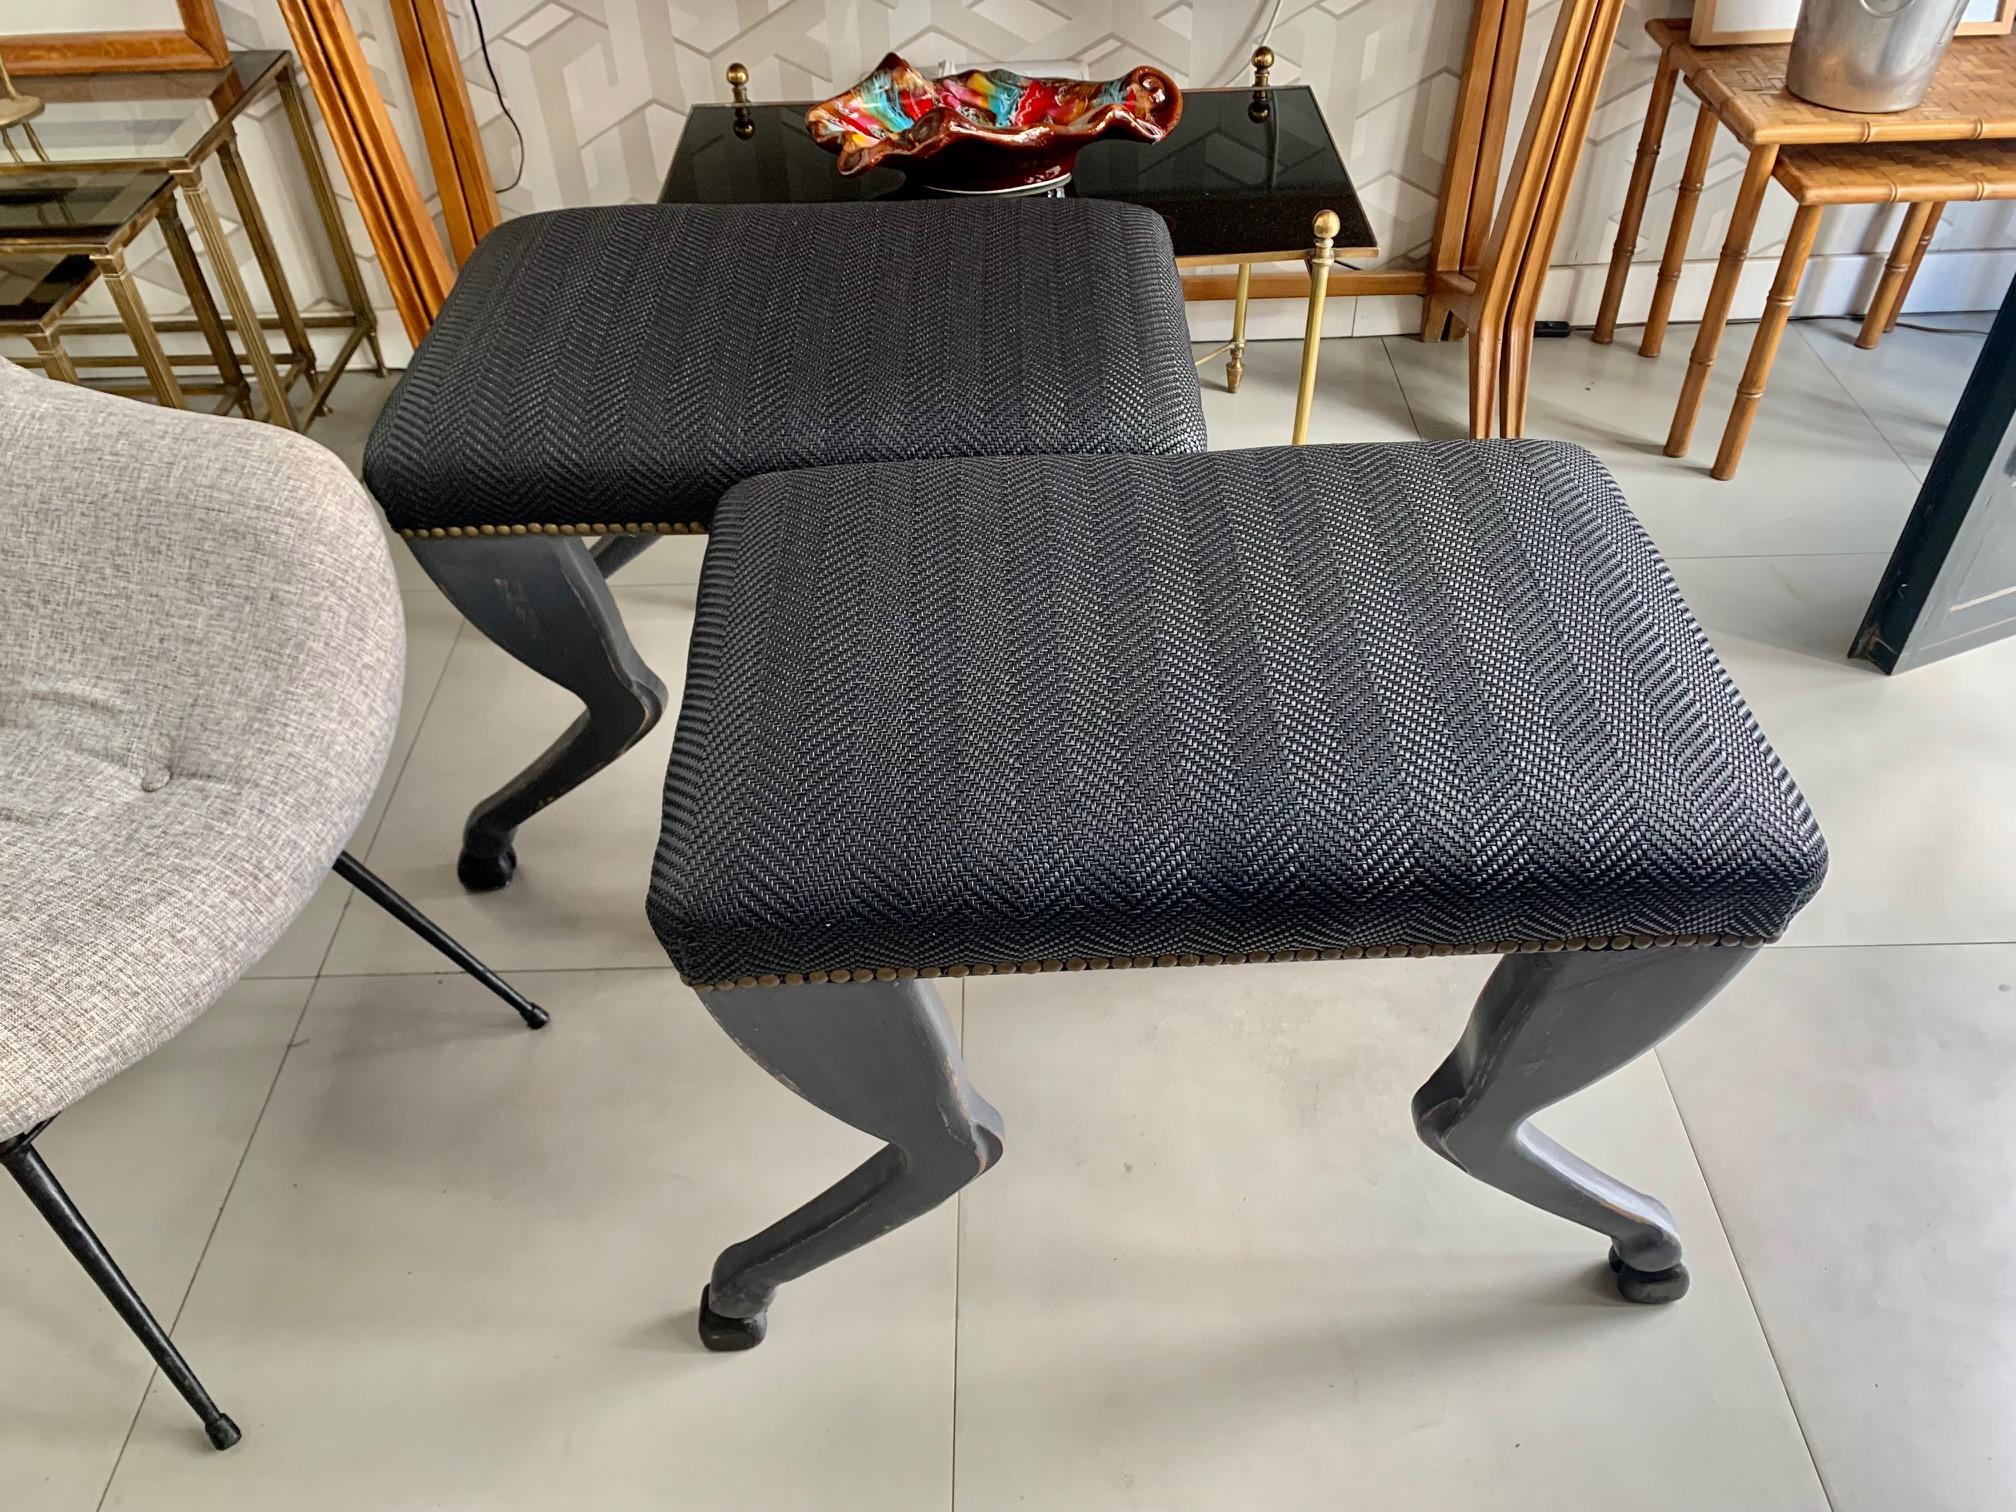 Pair of benches made by order by our cabinetmaker, in treated beech wood, manually carved imitating the legs of a horse, also painted by hand and patinated, in this case in dark gray and the hooves in black, the upholstery also in a color black with